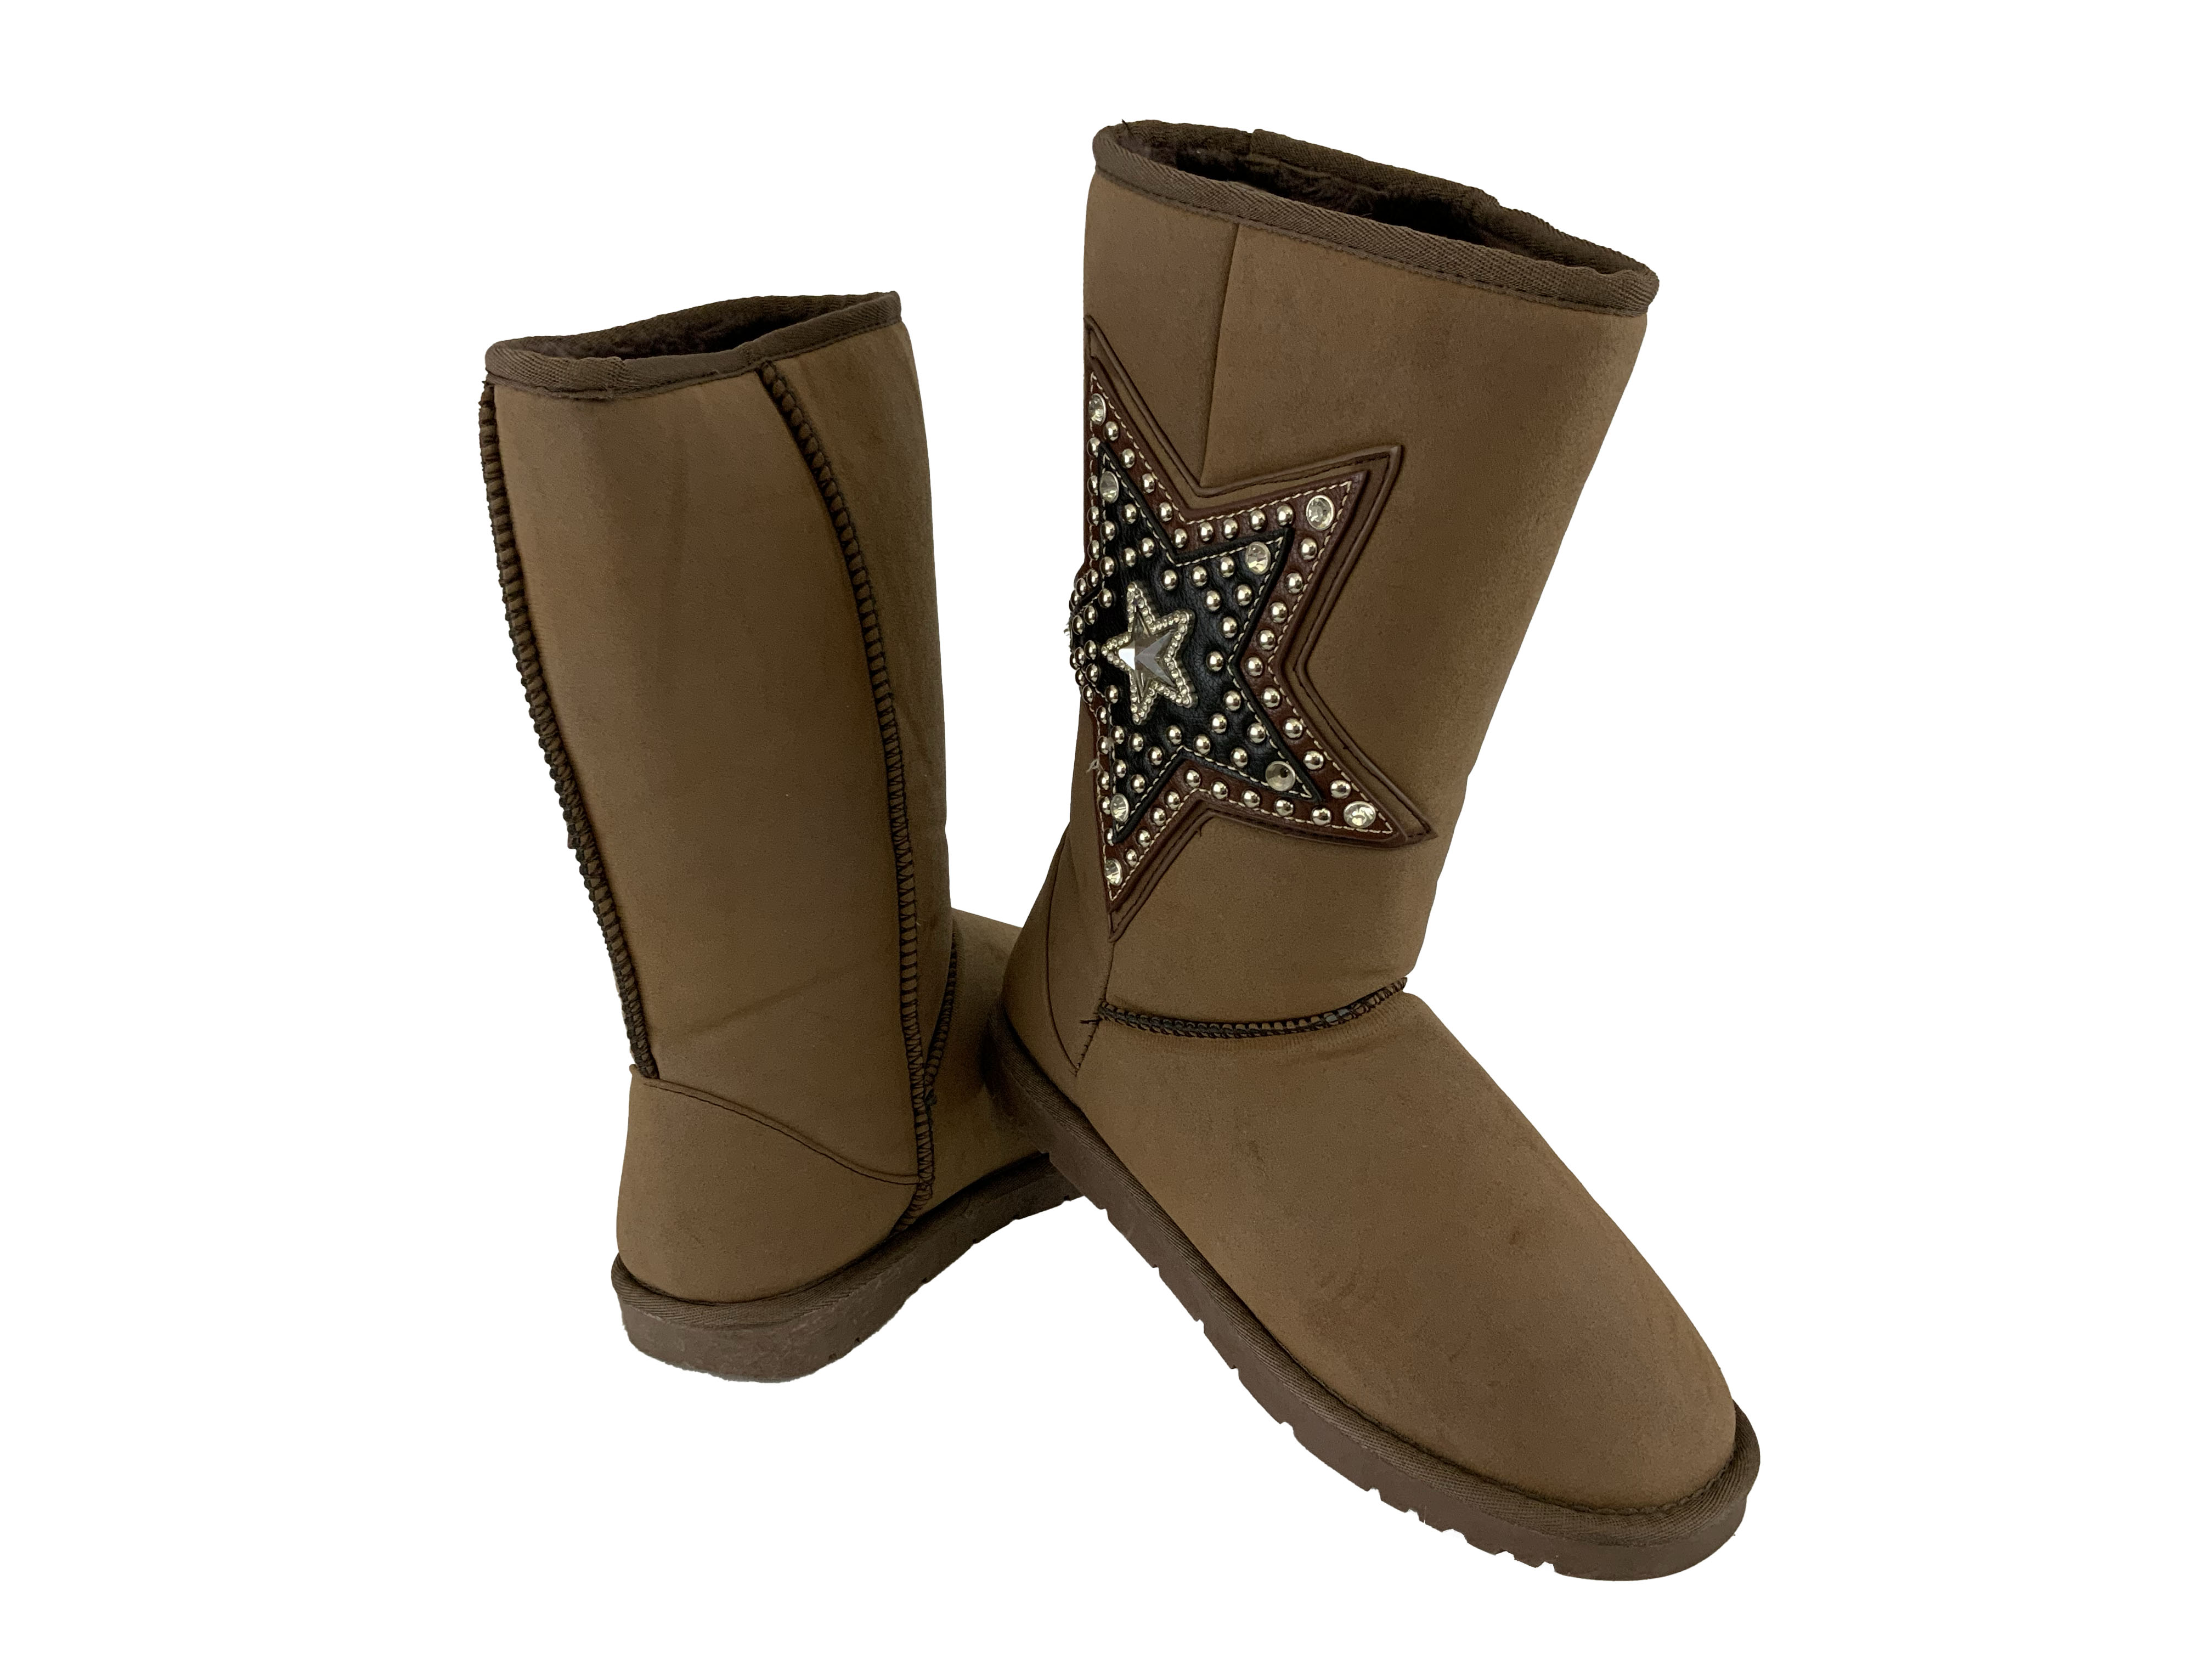 P&G Mocha suede tall boot with leather star and rhinestones